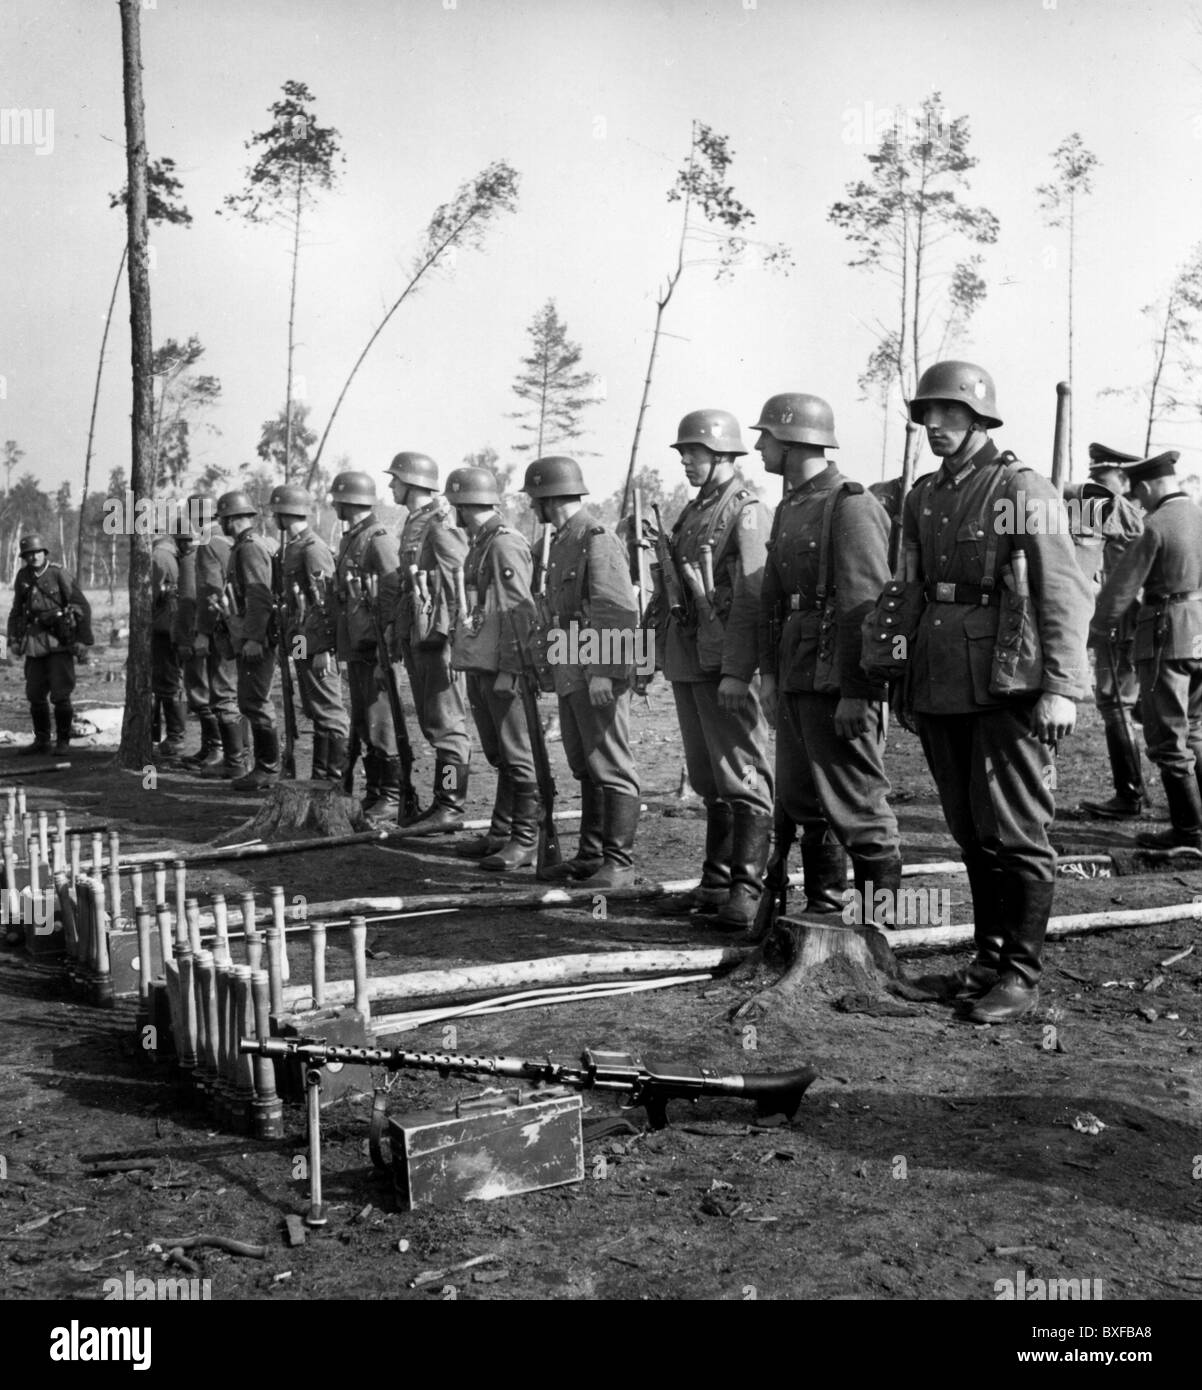 Nazism / National Socialism, military, Wehrmacht, army, lined up raiding patrol, circa 1940, in the foreground a machinegun MG 34, Germany, Third Reich, soldiers, Second World War, WWII, uniform, uniforms, 20th century, historic, historical, training, hand grenades, machineguns, machine gun, guns, MG34, MG-34, equipment, arms, weapons, 1940s, people, Additional-Rights-Clearences-Not Available Stock Photo